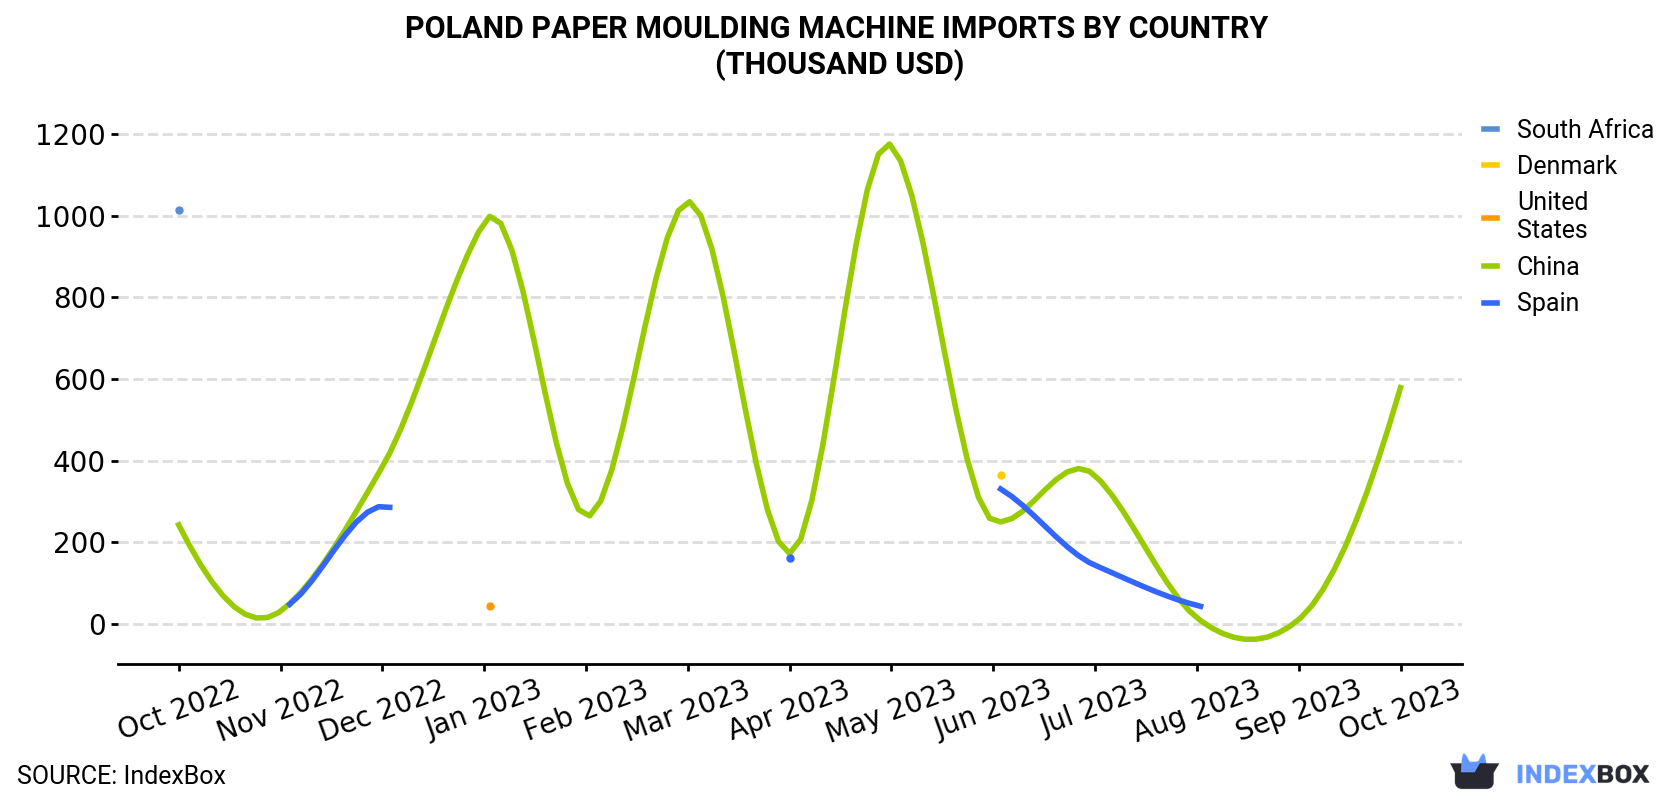 Poland Paper Moulding Machine Imports By Country (Thousand USD)